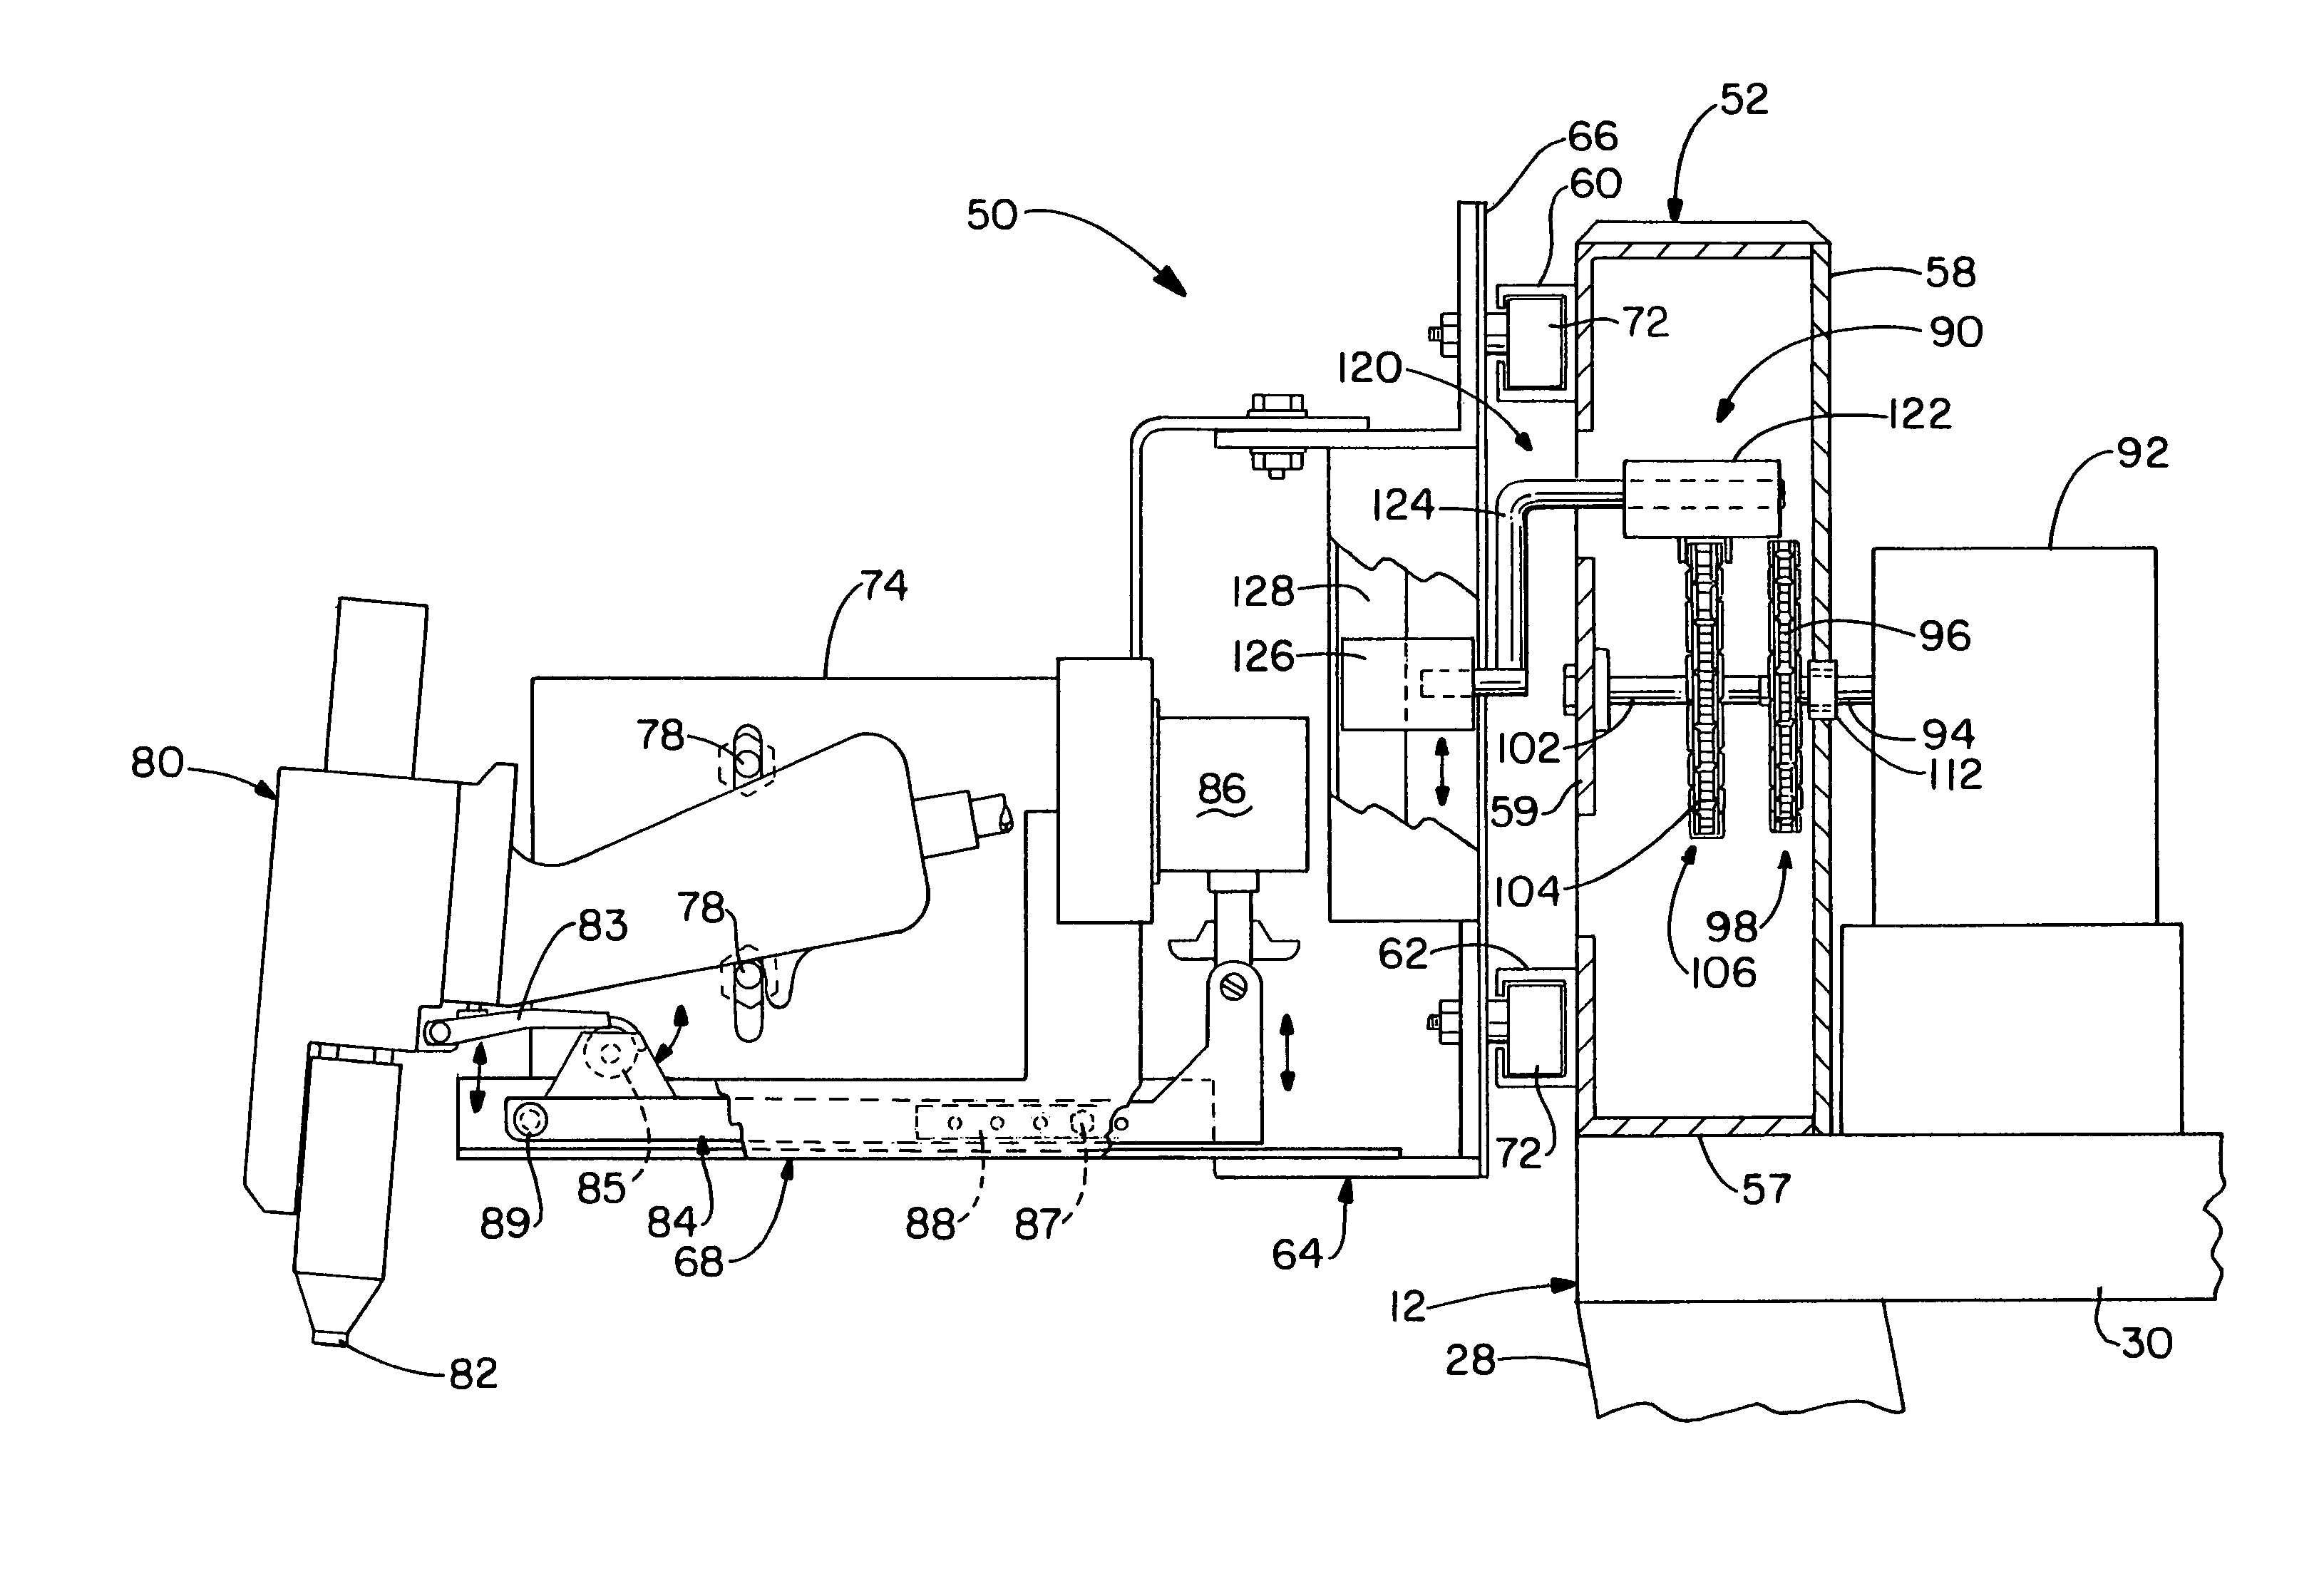 Apparatus for applying a coating to a roof or other substrate